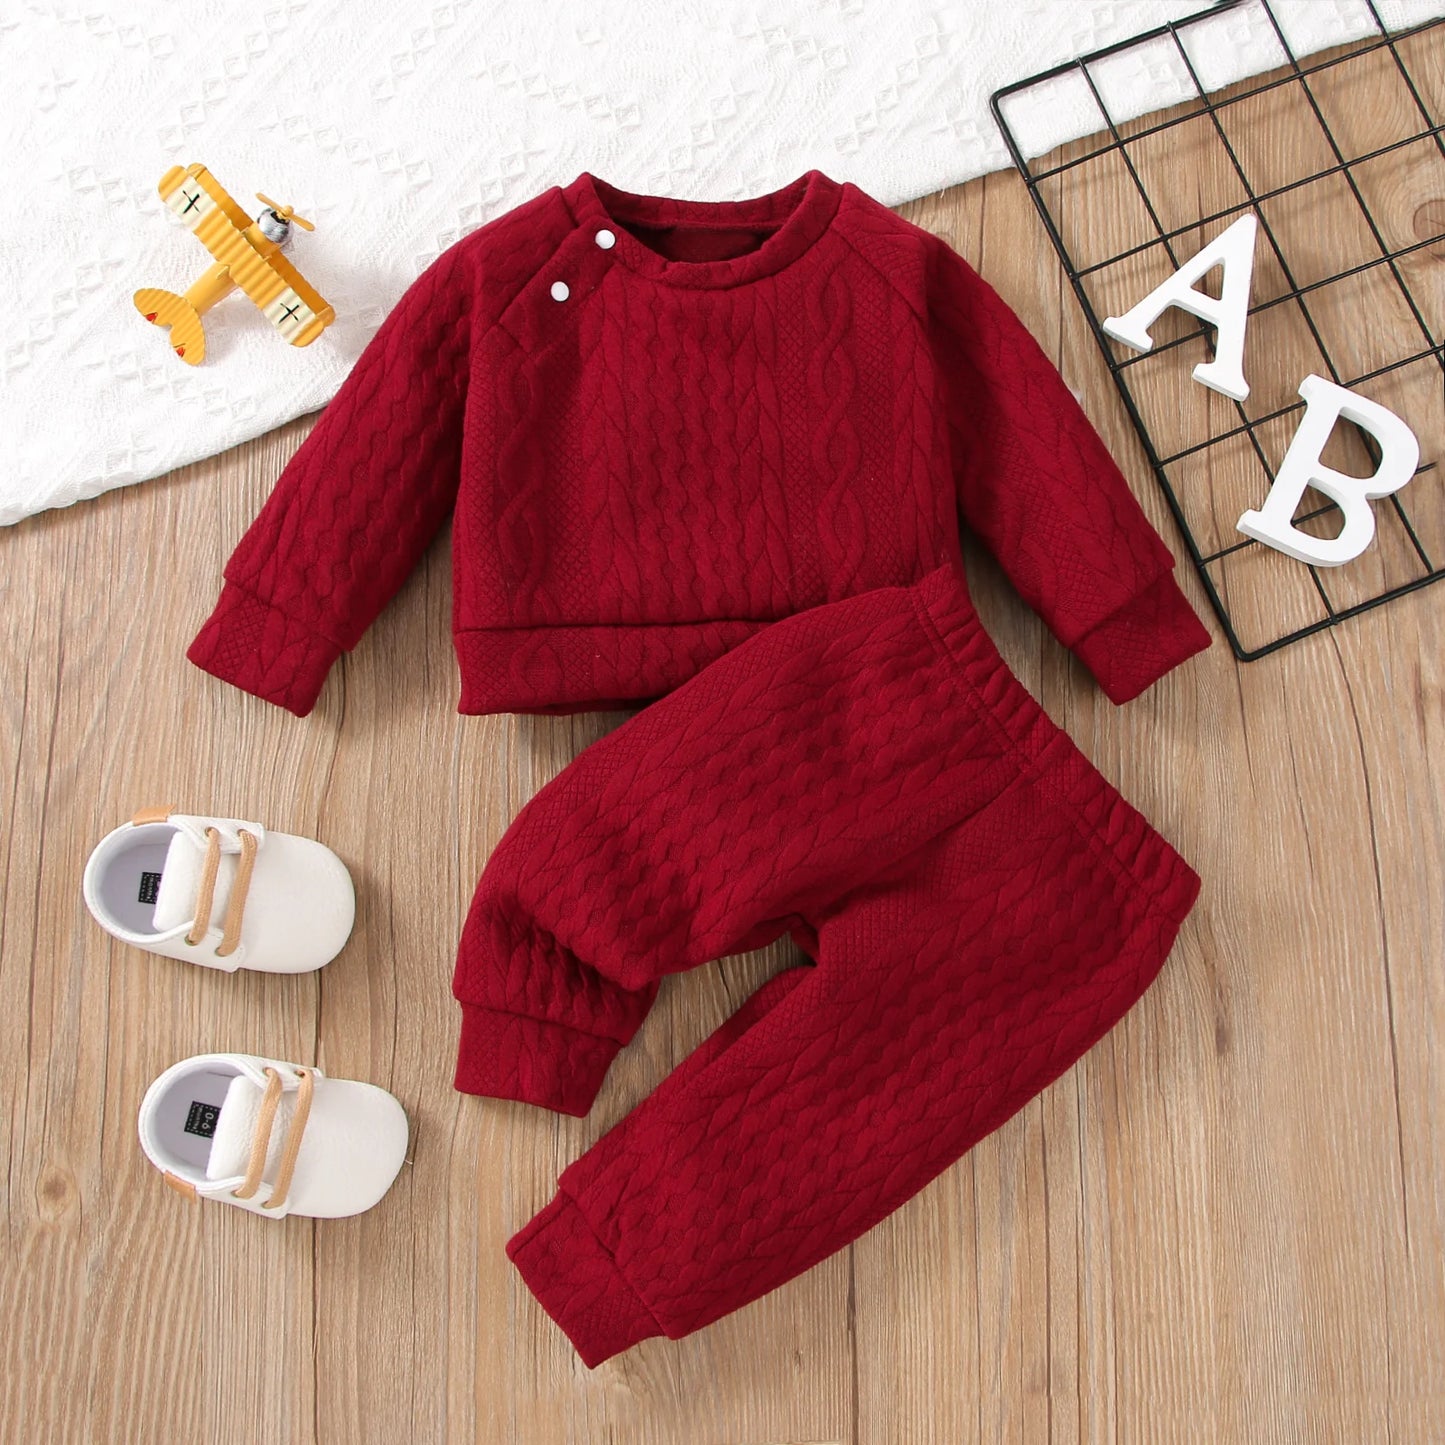 Newborn Baby Girl Boy Clothes Set Solid Color Long Sleeves Top + Pants 2PCS Costume Leisure Sport Spring and Autumn Costume Suit